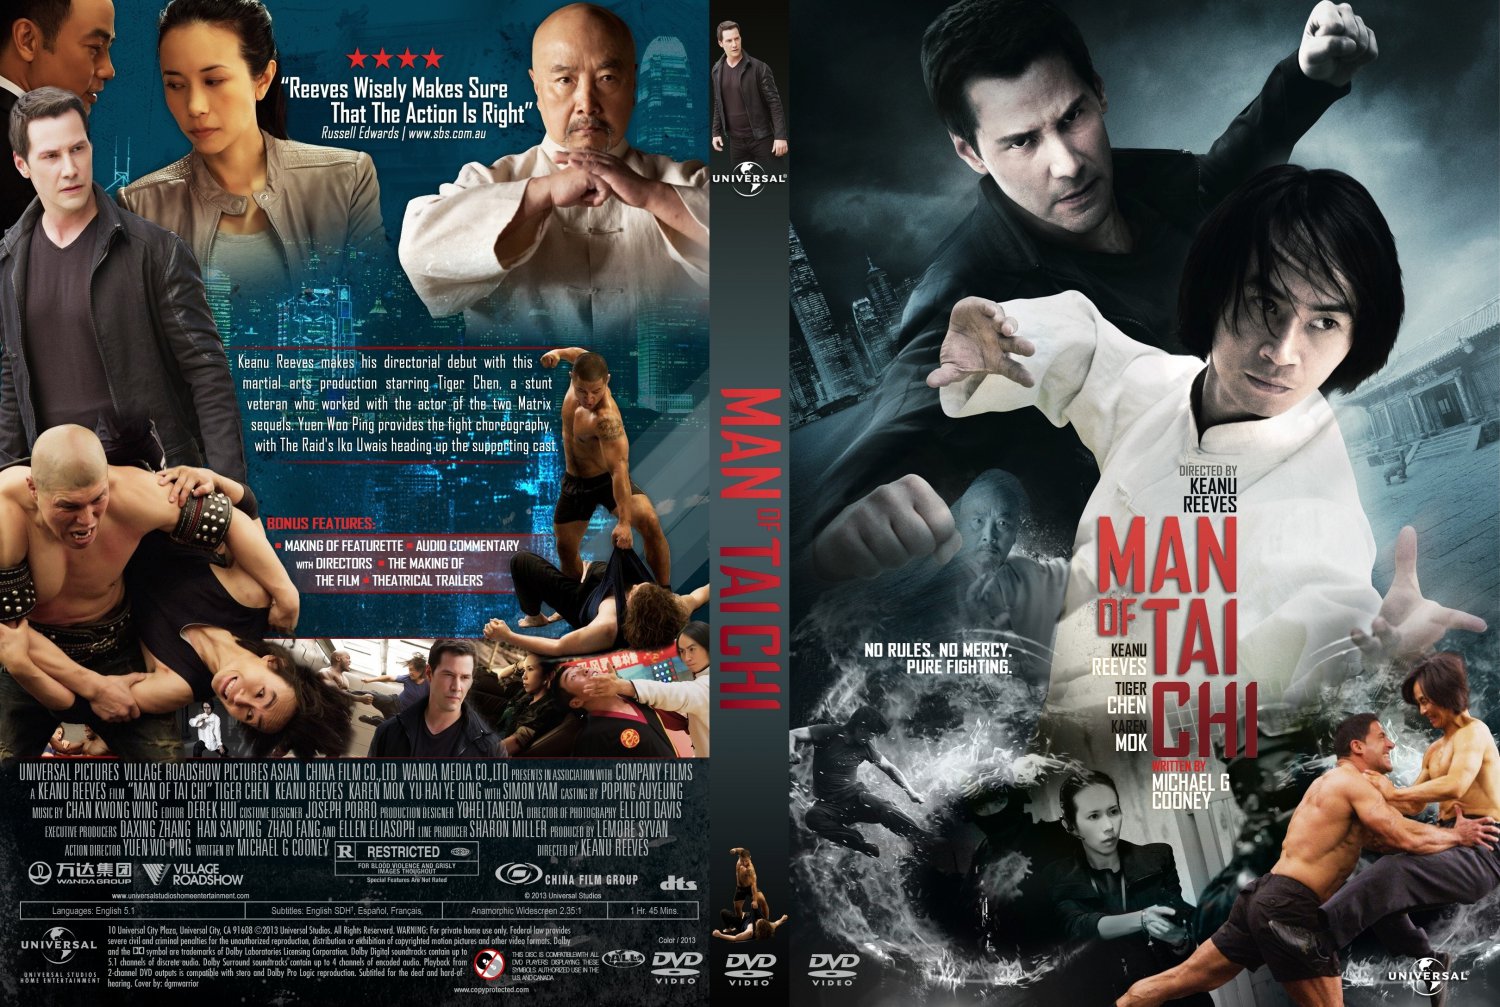 Man Of Tai Chi Backgrounds, Compatible - PC, Mobile, Gadgets| 1500x1007 px